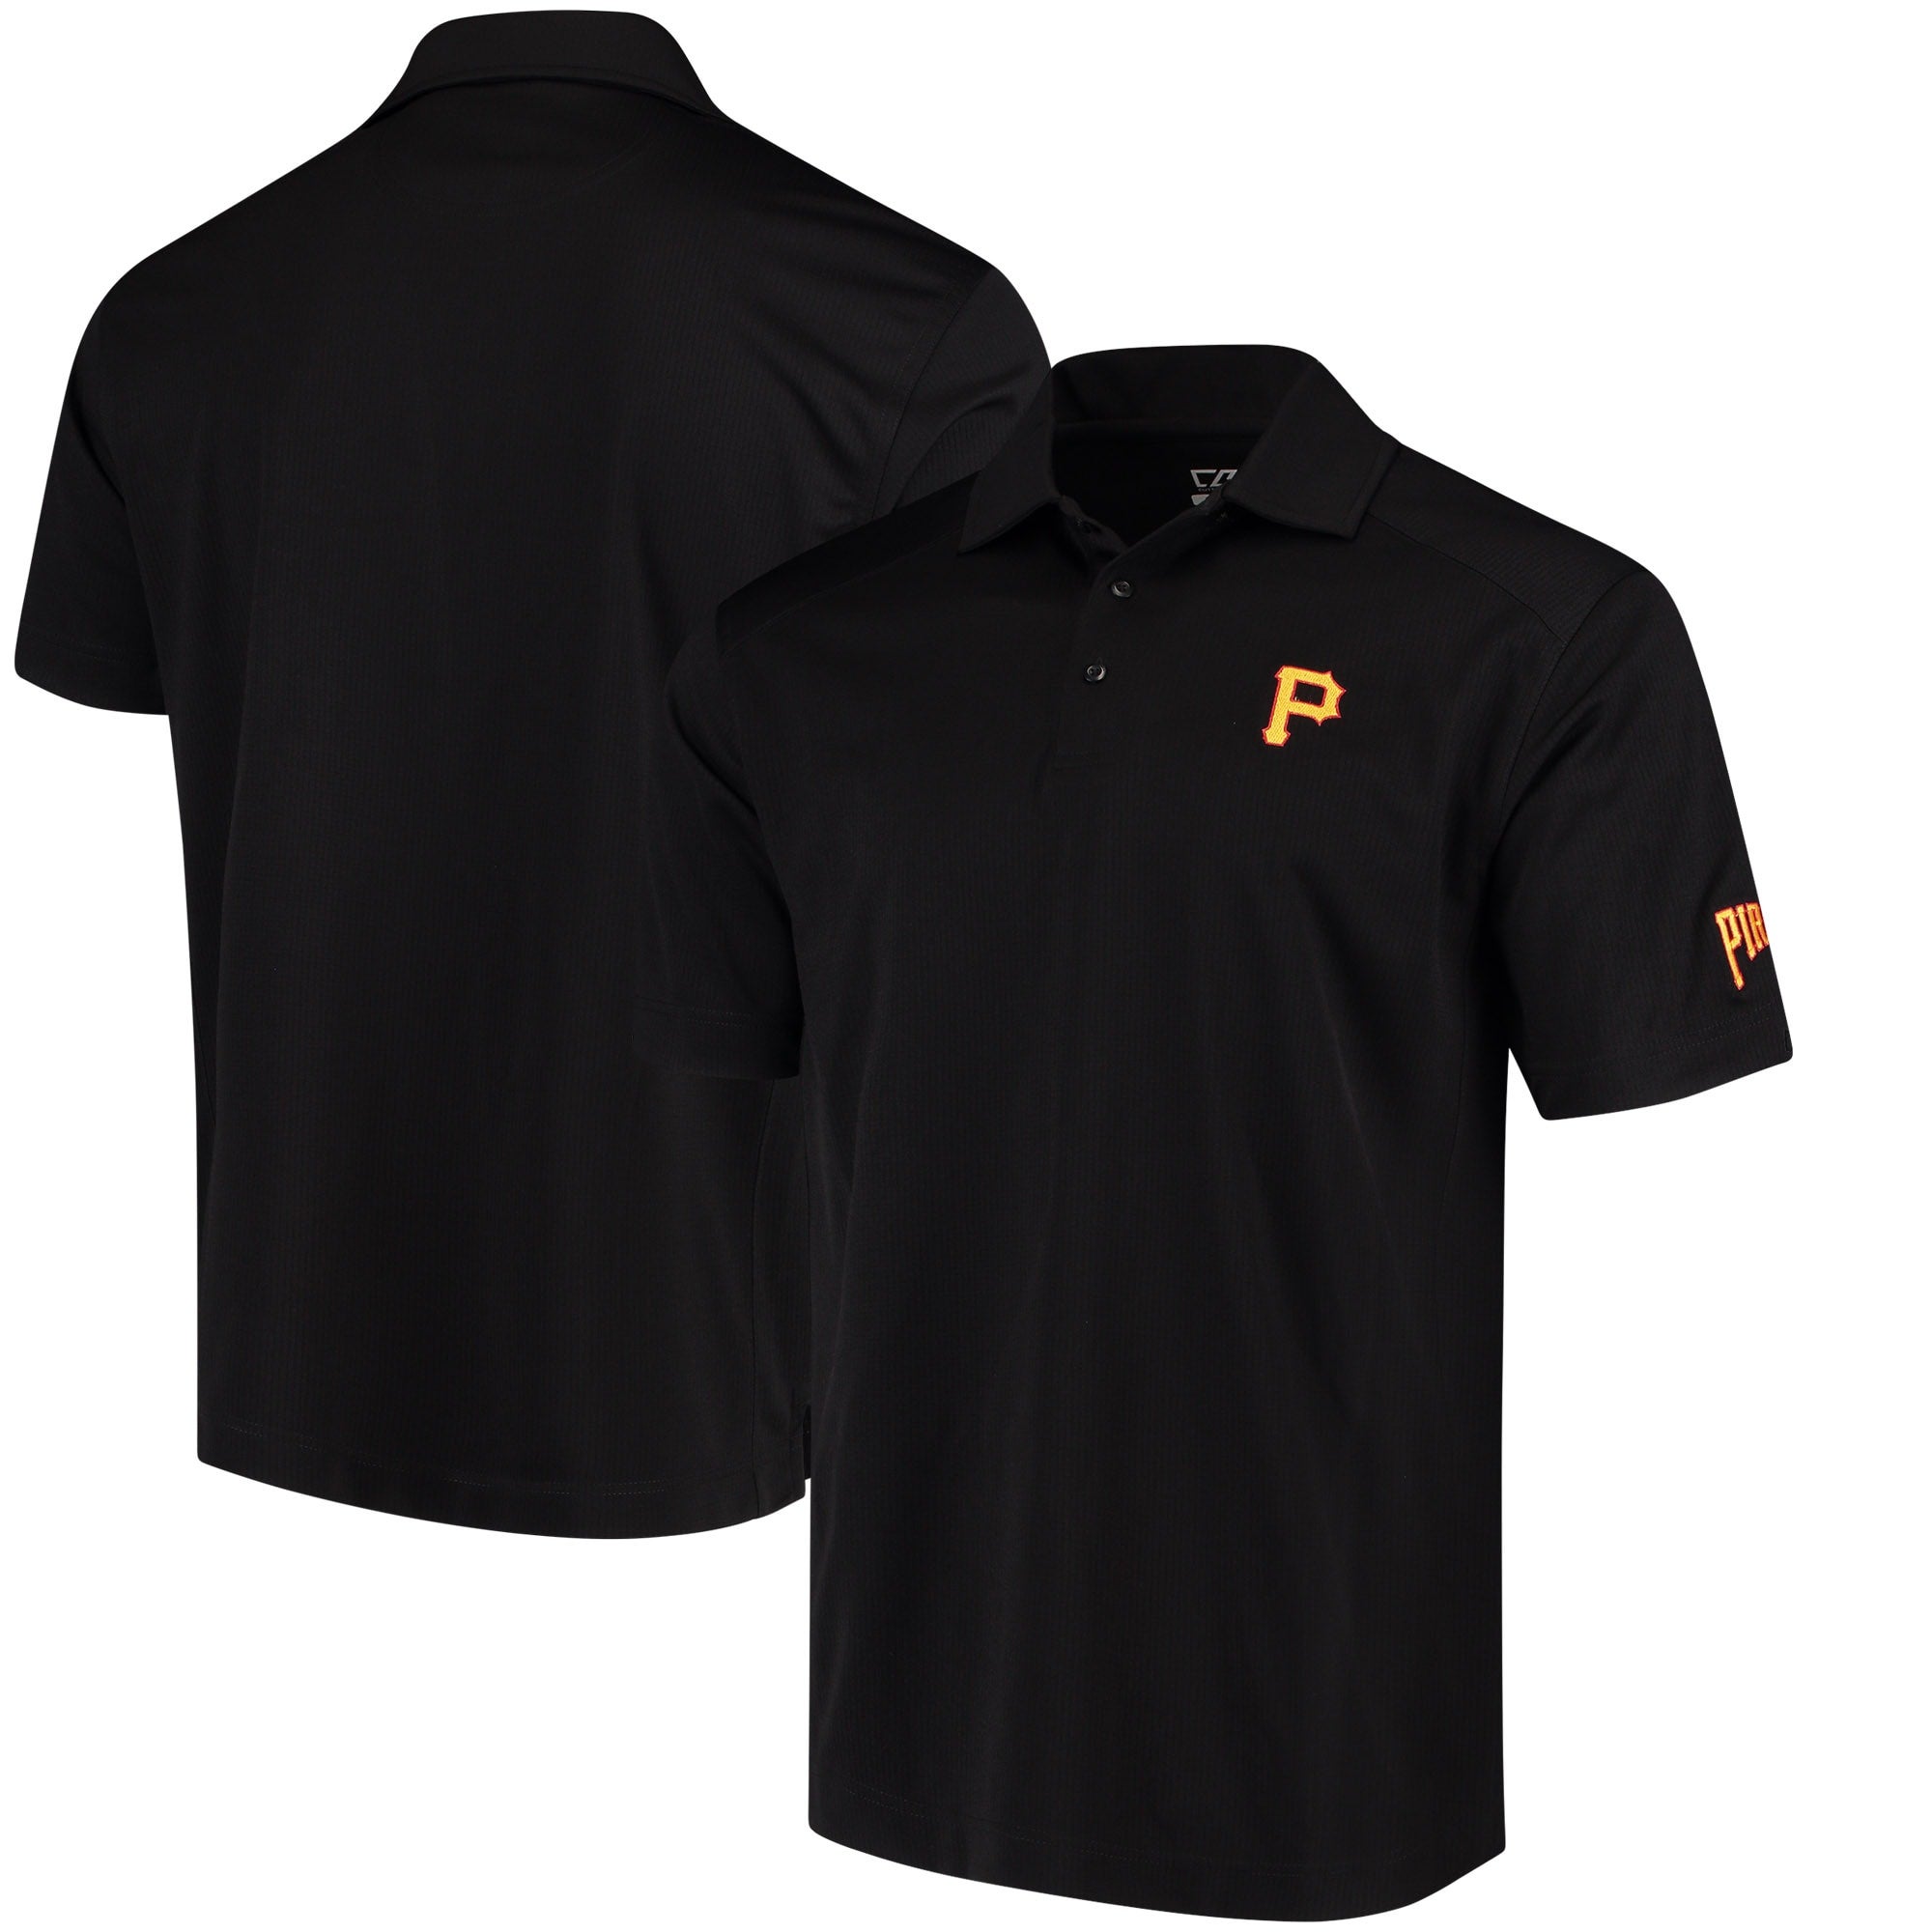 Cutter & Buck Pirates Genre Polo with Sleeve Logo - Men's